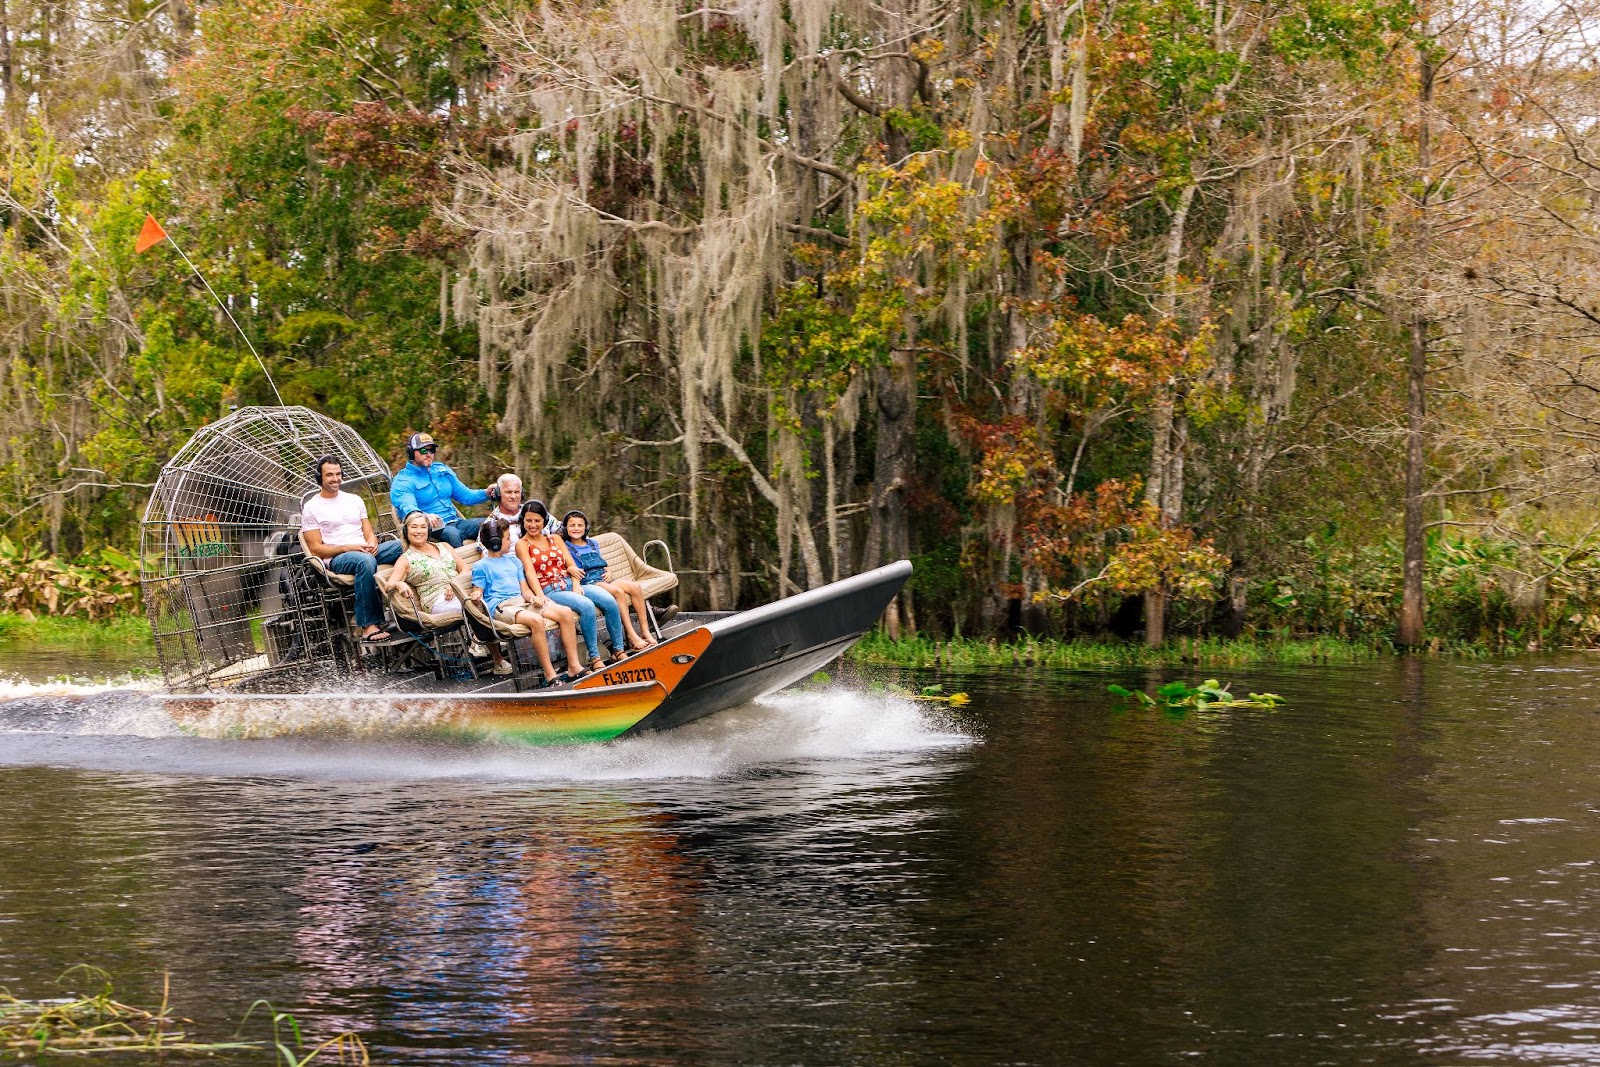 A family enjoys an airboat ride on a sunny day at the Wild Florida Everglades